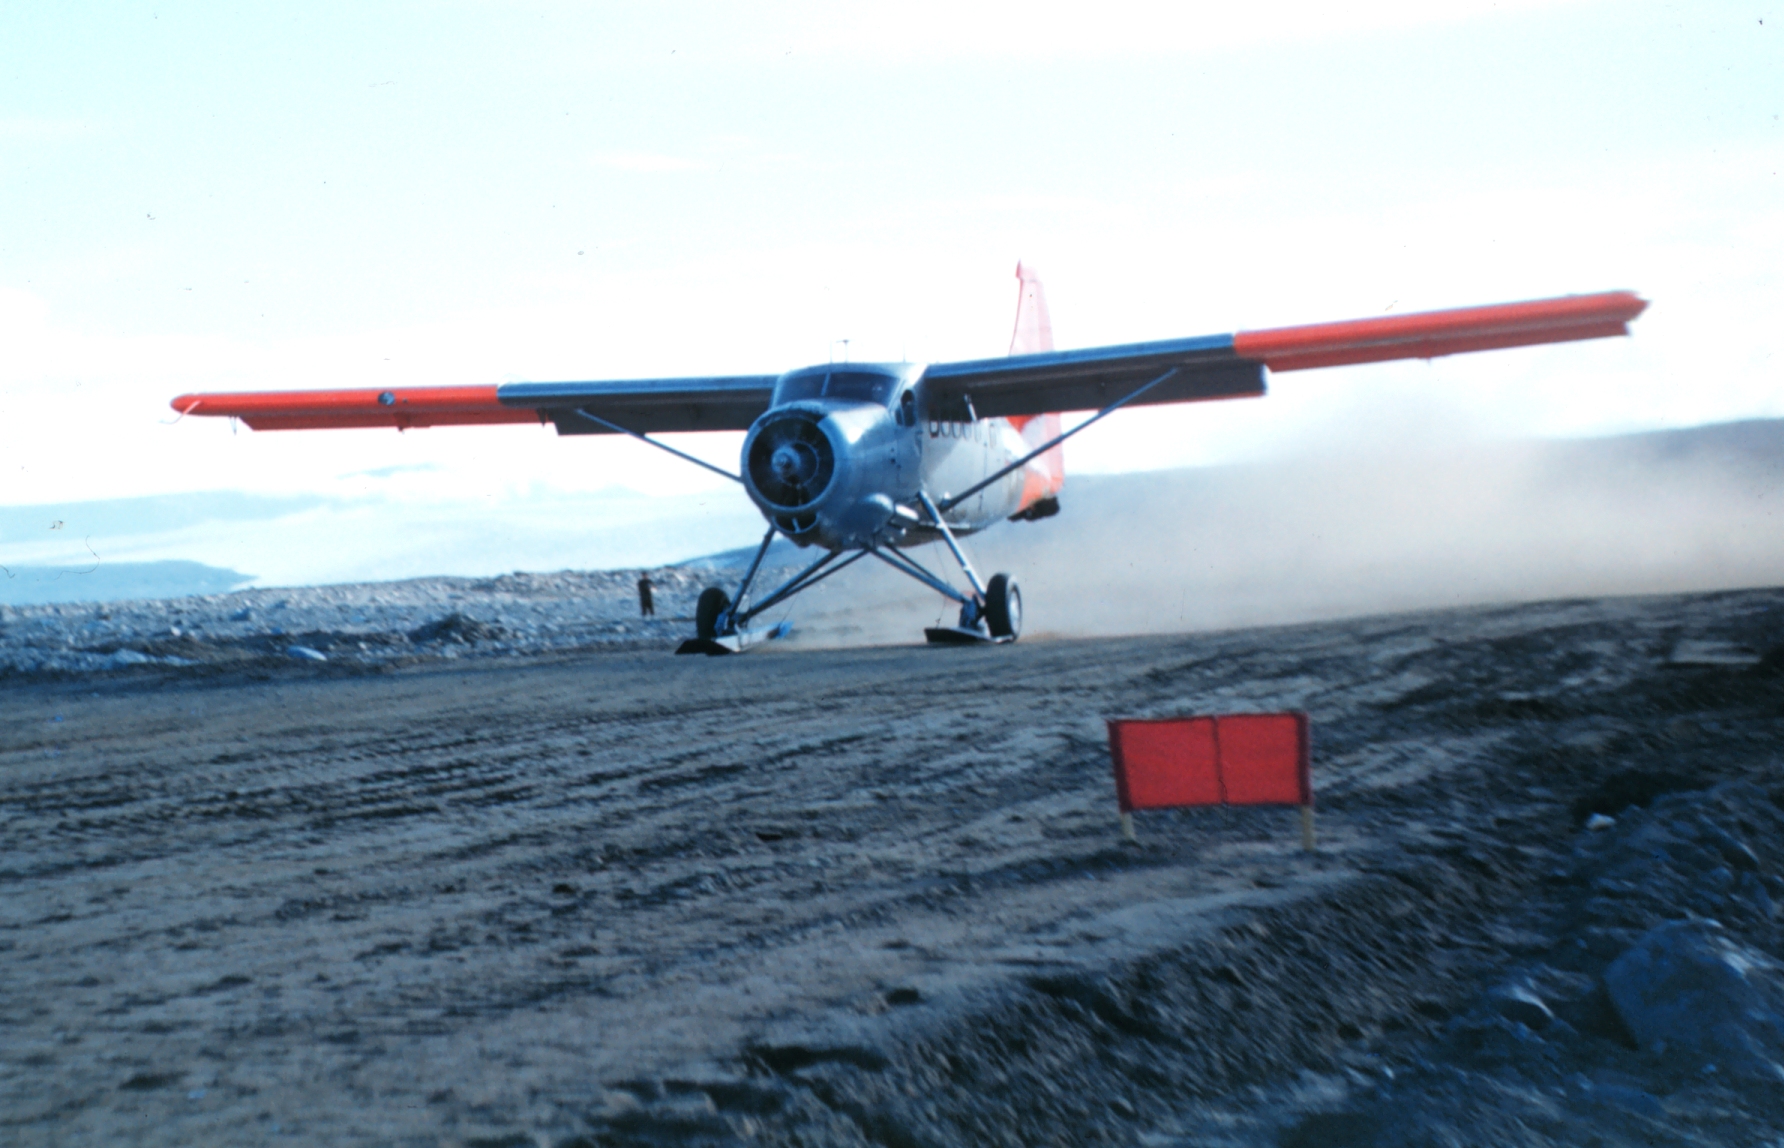 A small airplane lands on a dirt runway.